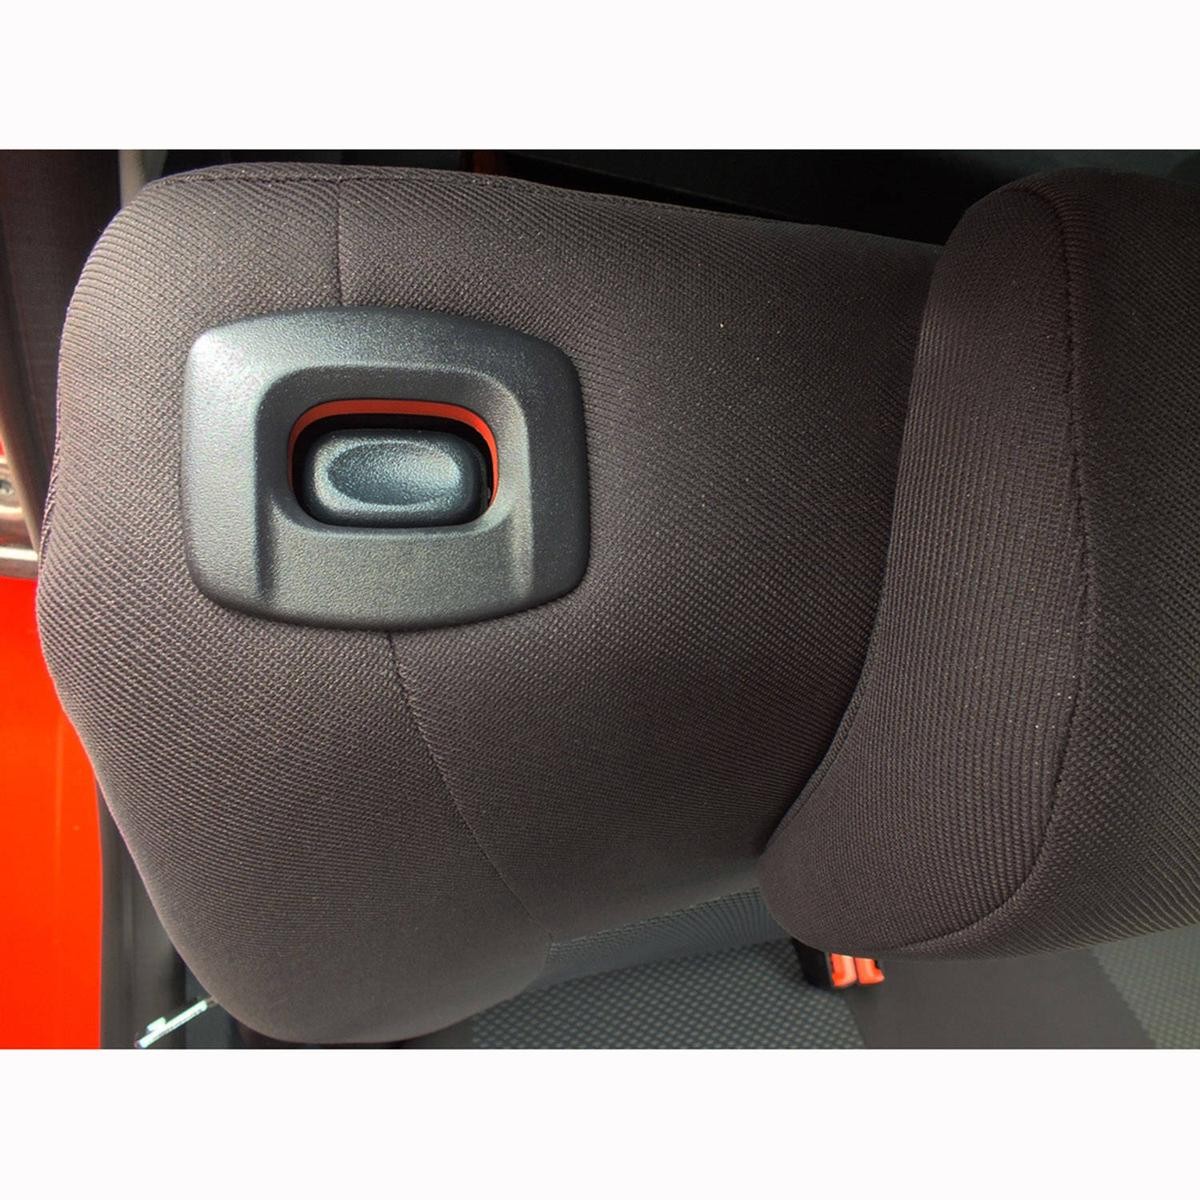 S-/07_T06 Seat cover S-/07_T06 ATRA black, Front